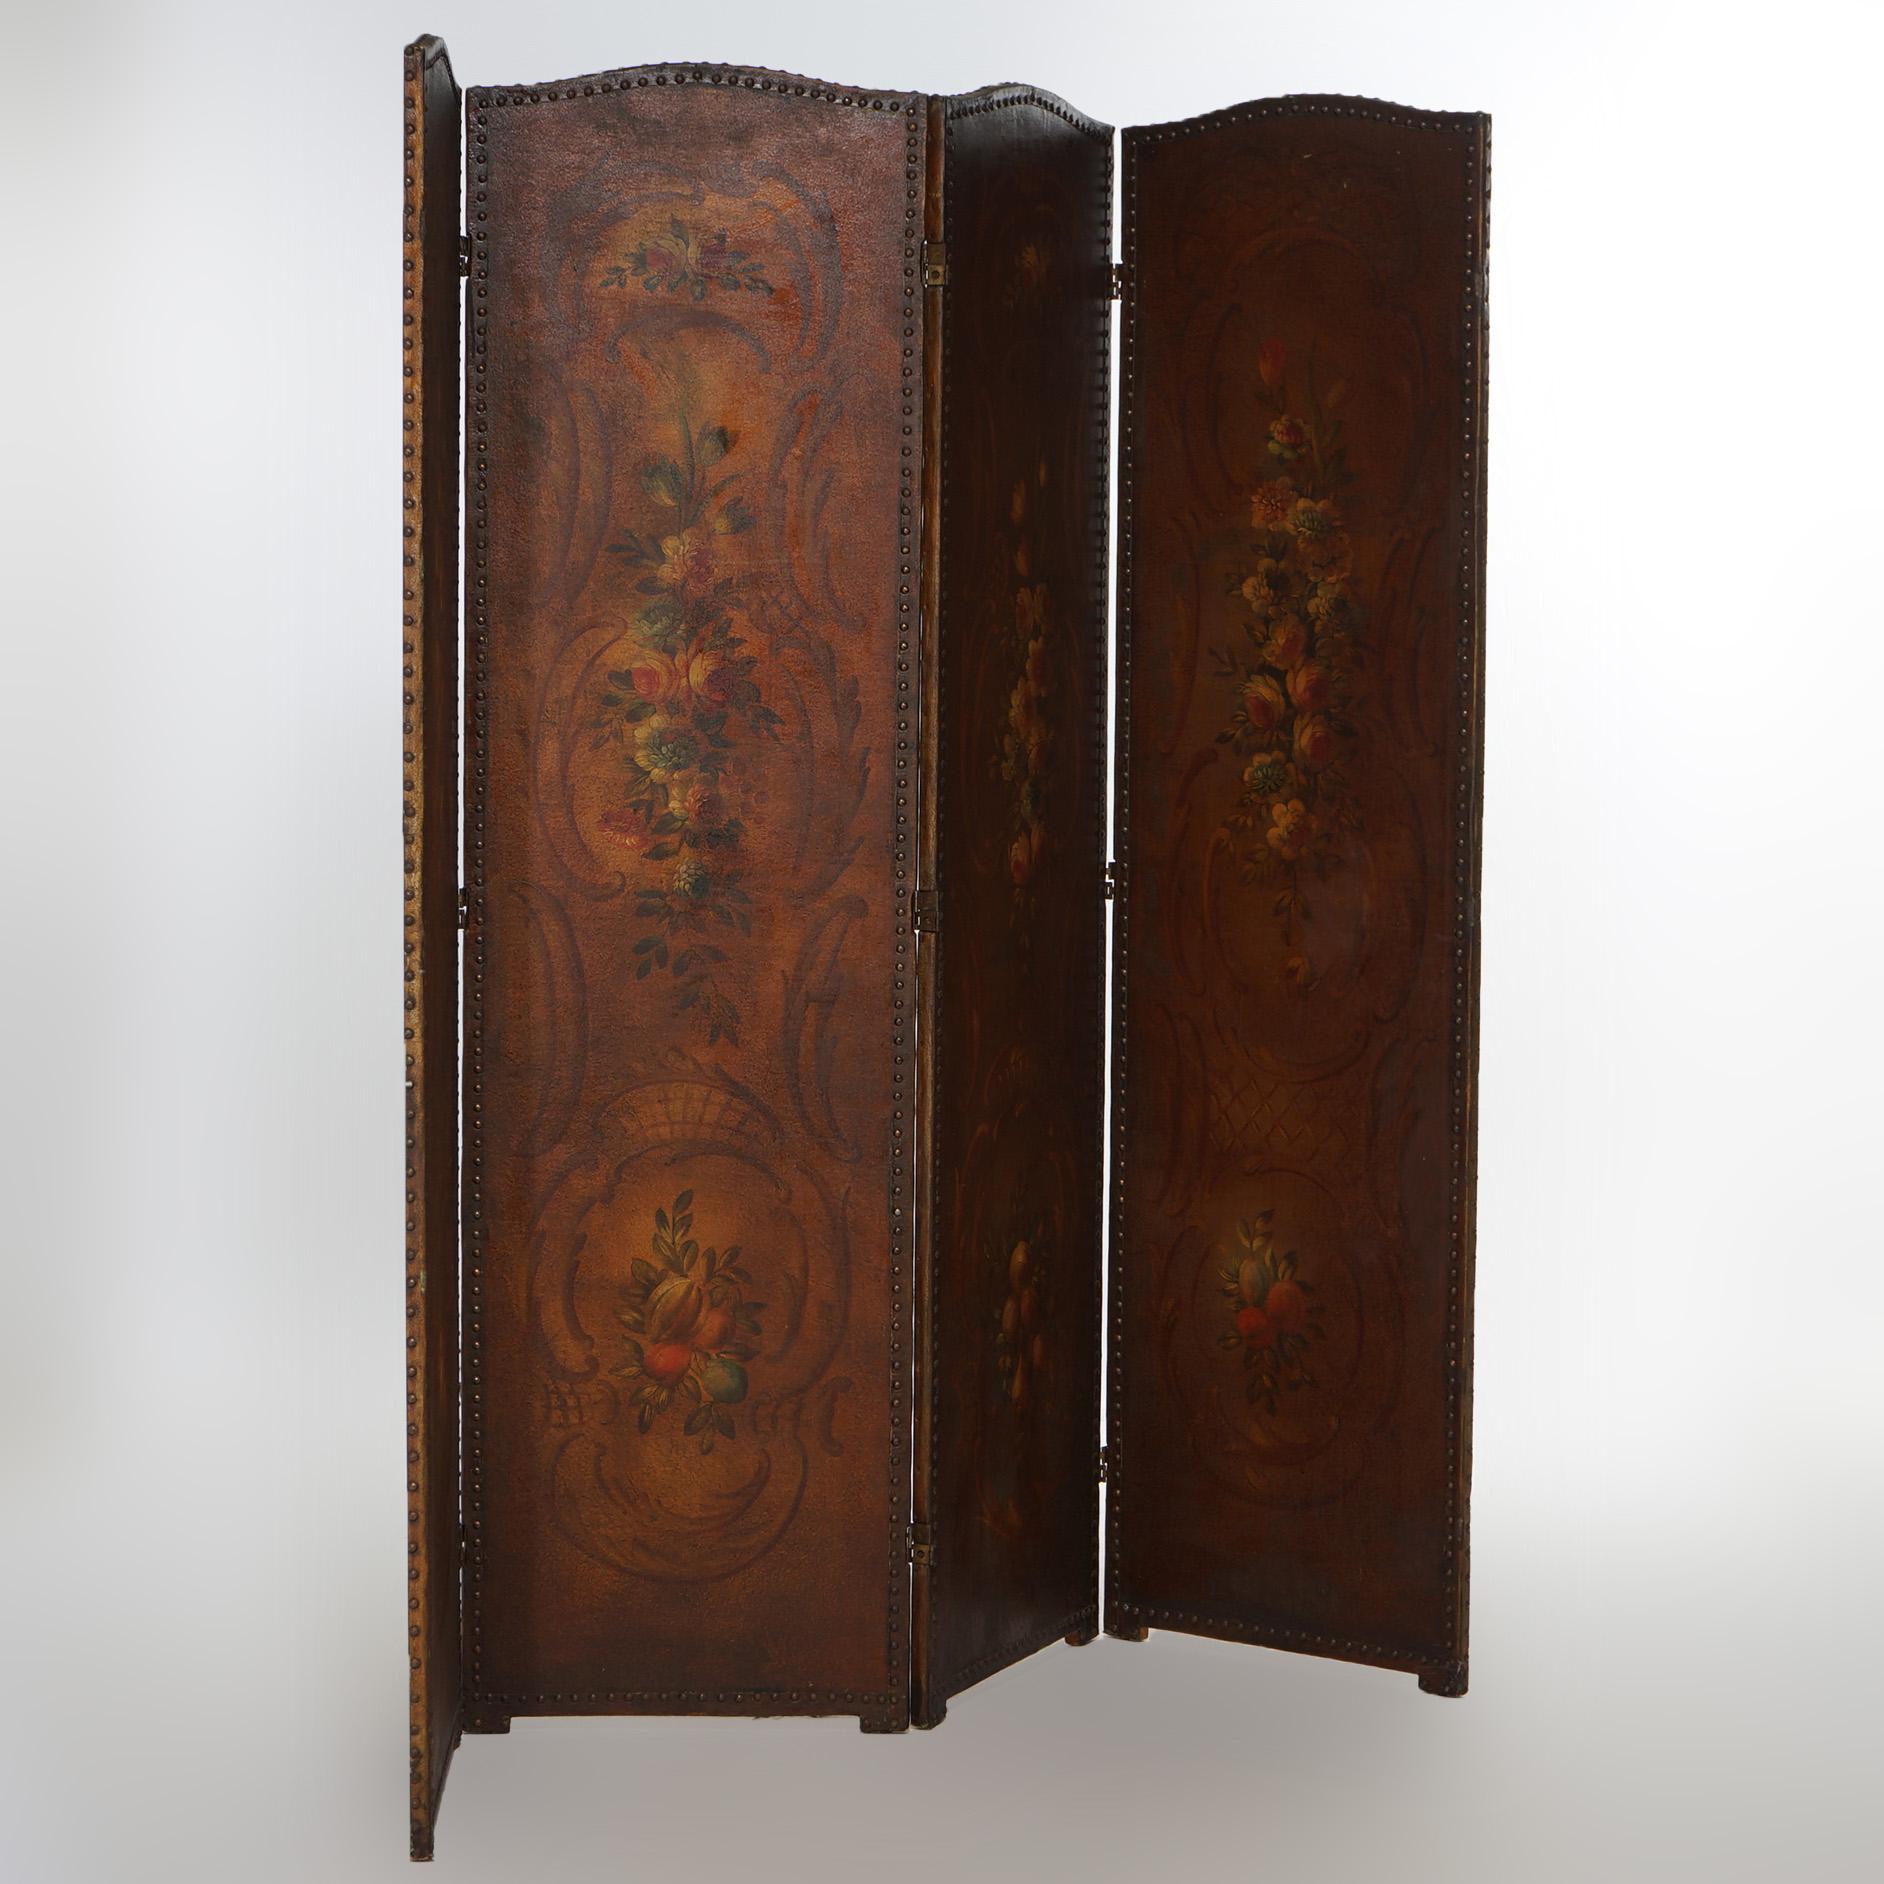 Antique Arts and Crafts Leather Folding Screen with Polychromed Floral Design C1920

Measures- 78.25''H x 84''W x 1''D